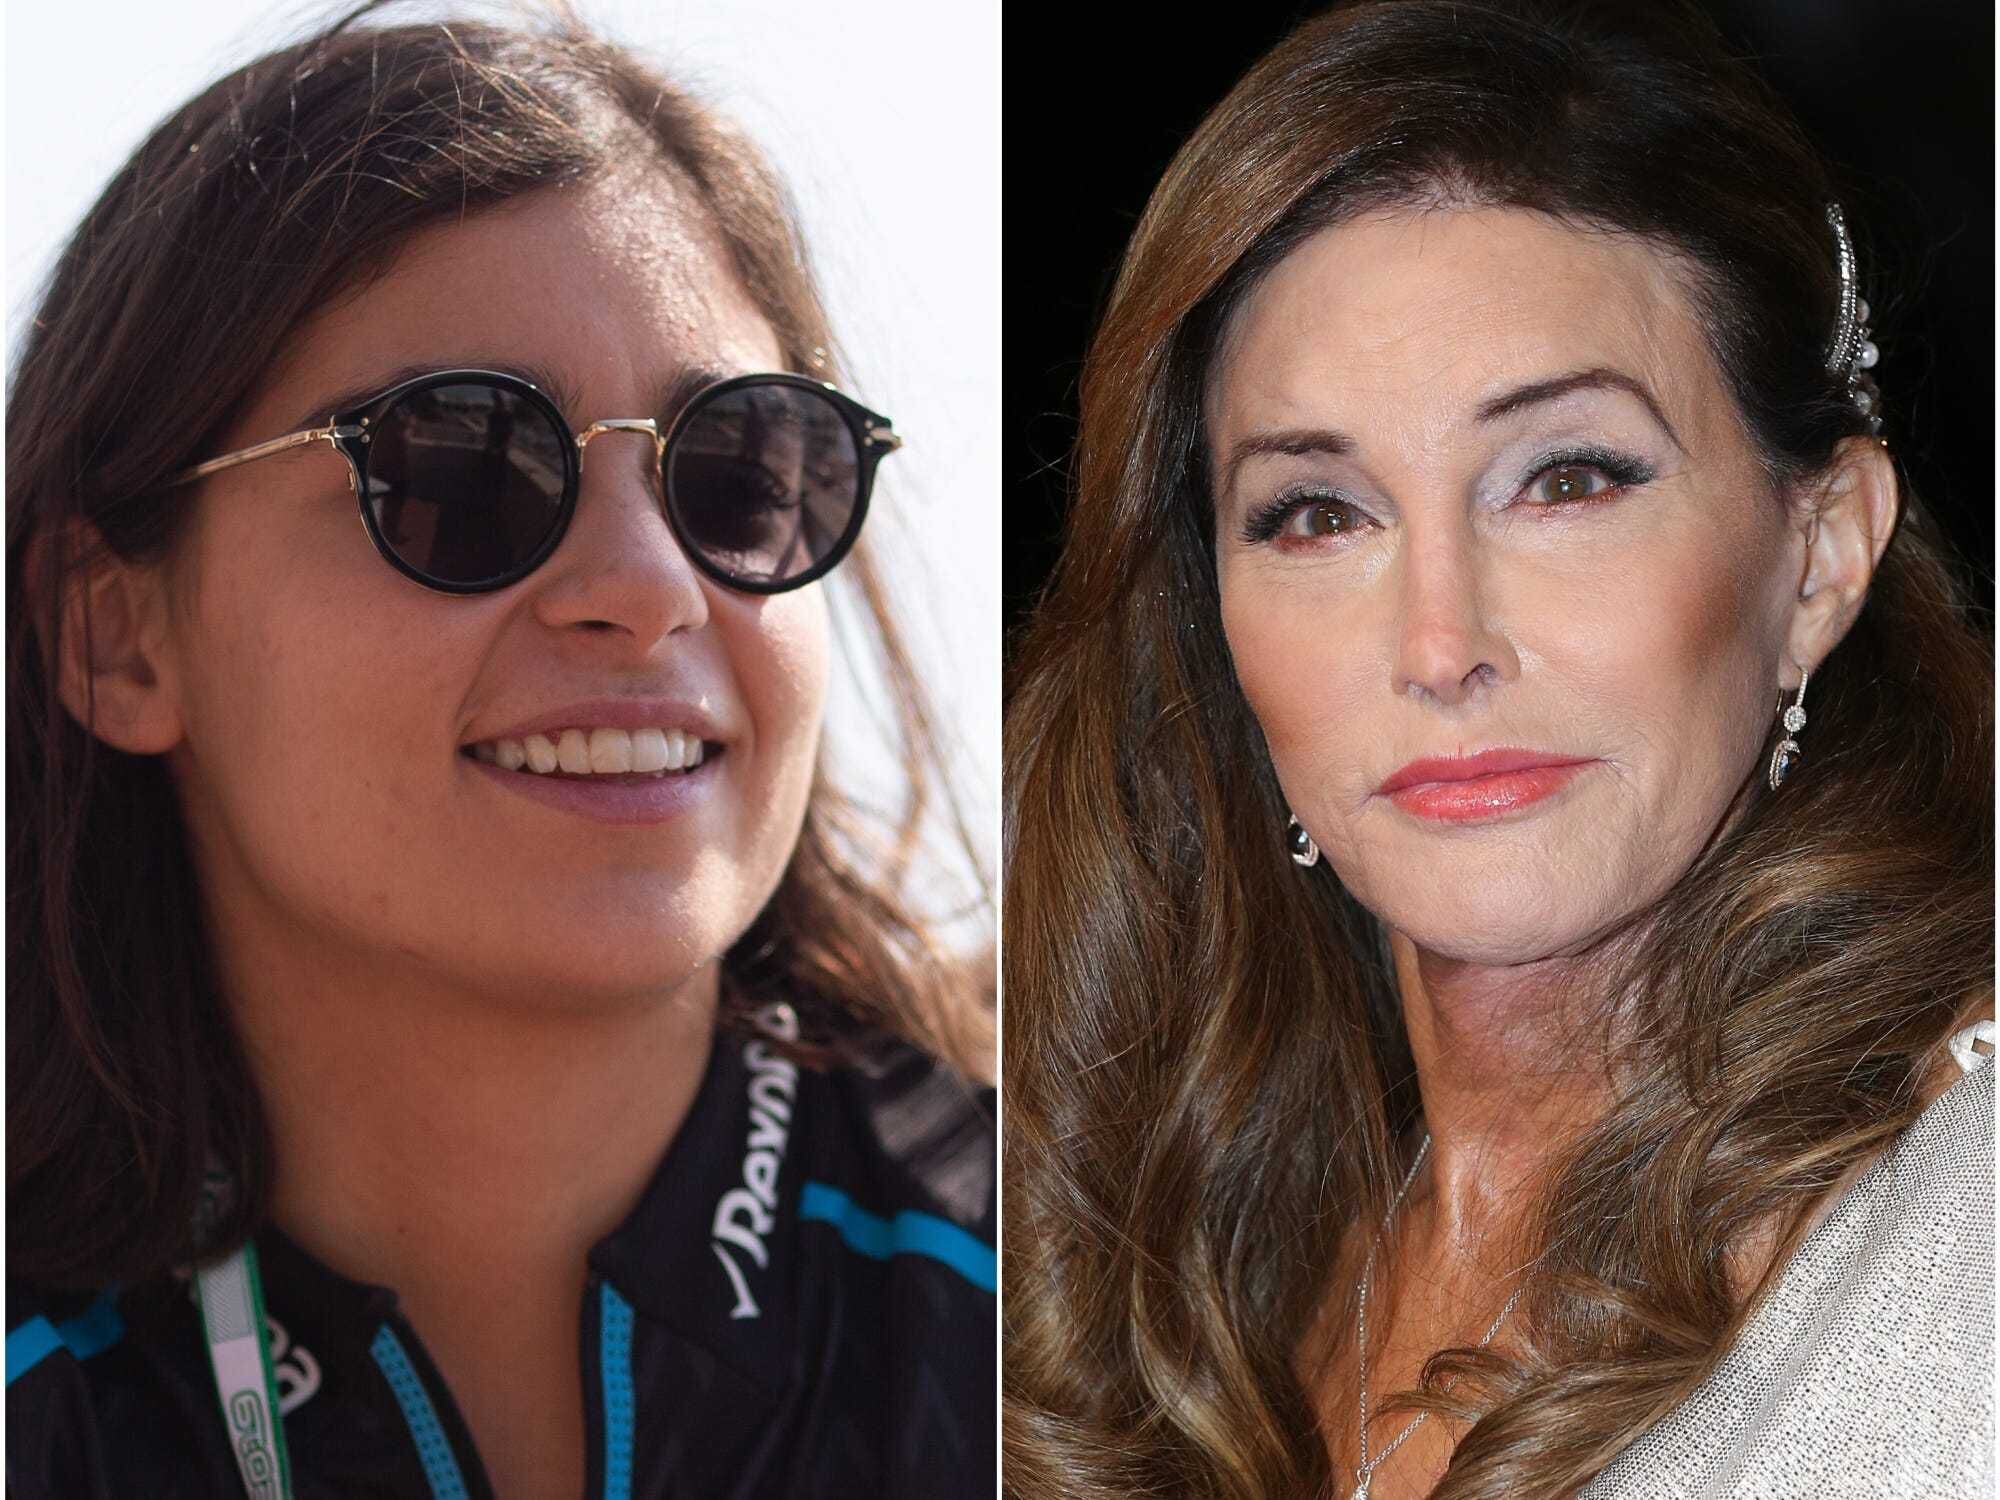 Reigning W Series champion Jamie Chadwick joins Caitlyn Jenner’s new racing team